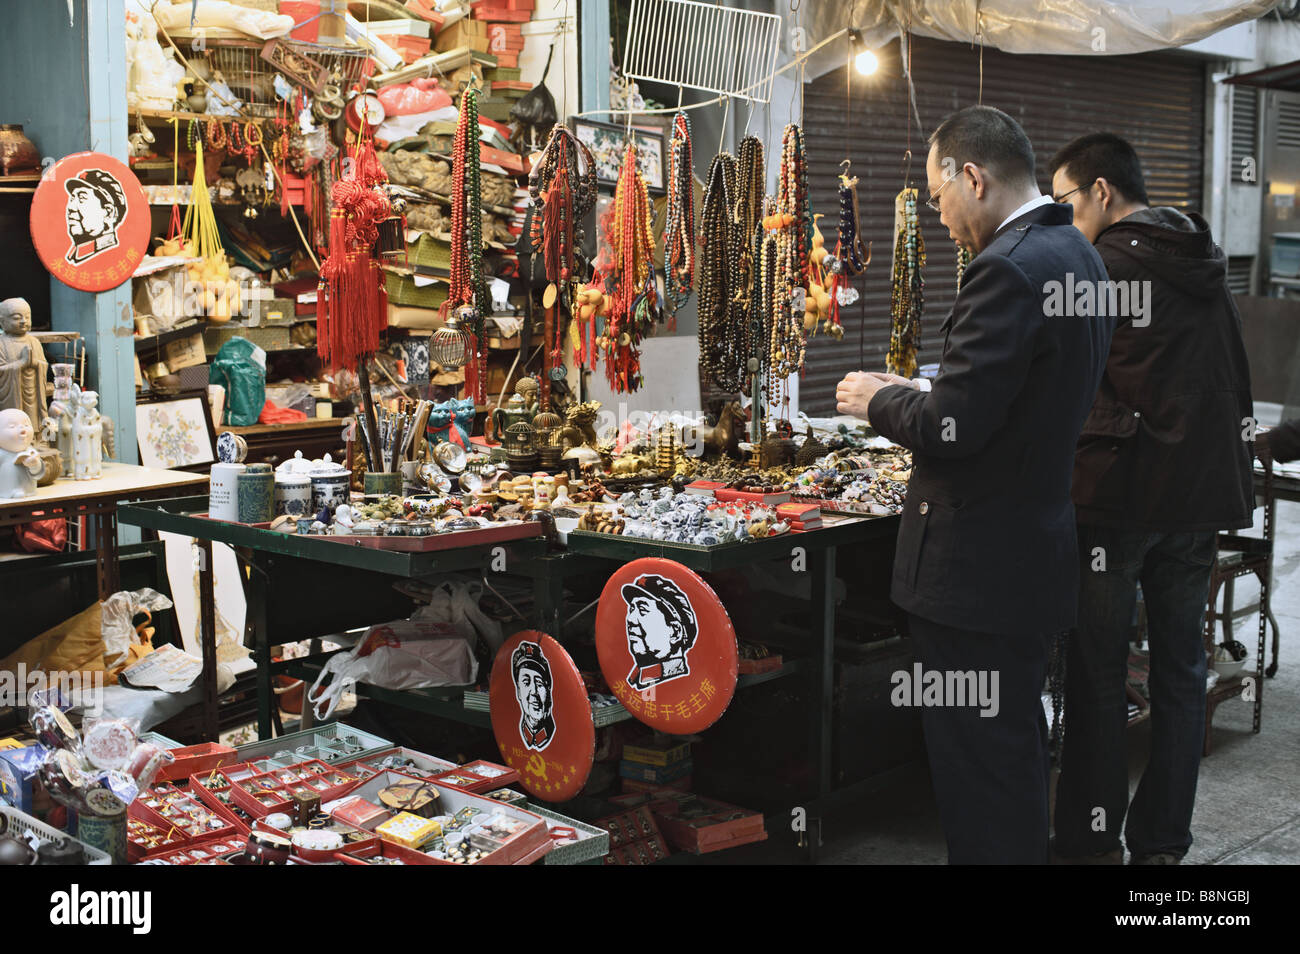 Shoppers surveying Mao Zedong souvenirs for sale at stall on Upper Lascar Row Hong Kong Stock Photo